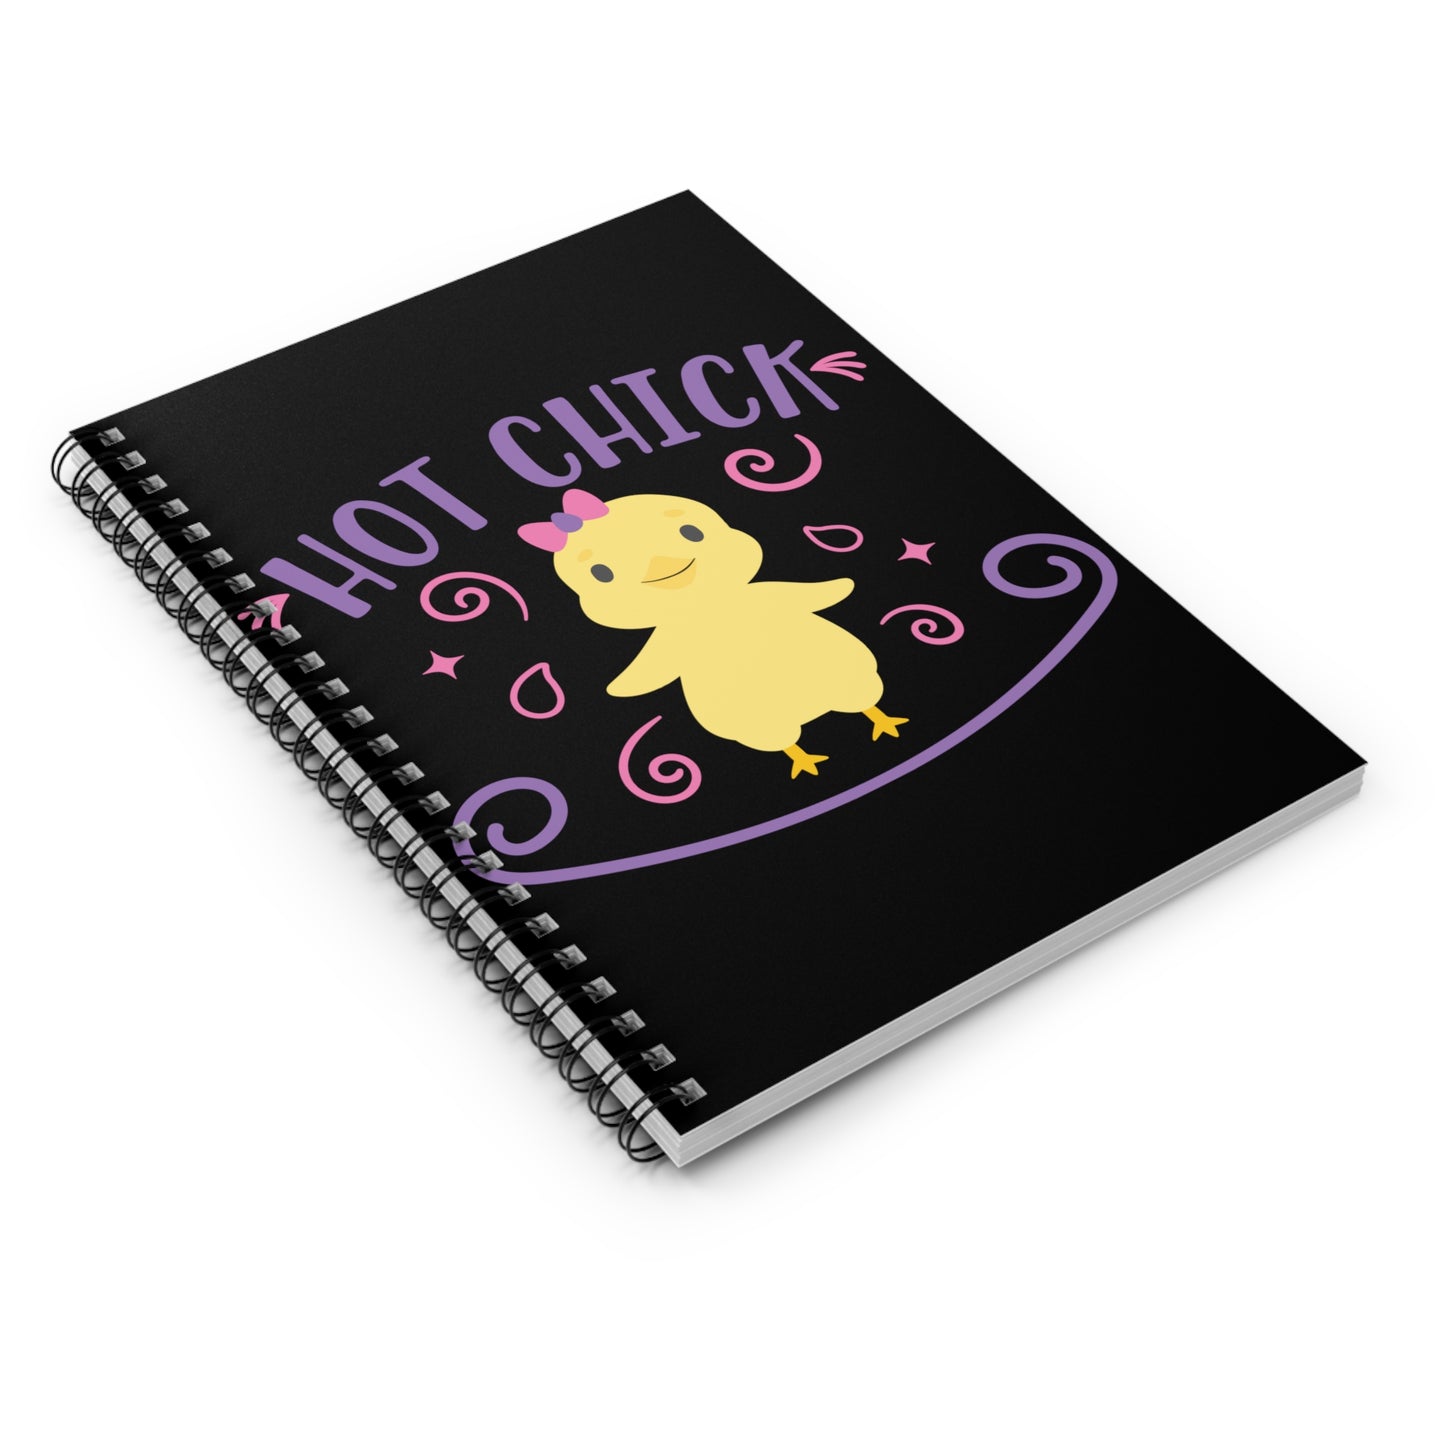 Hot Chick: Spiral Notebook - Log Books - Journals - Diaries - and More Custom Printed by TheGlassyLass